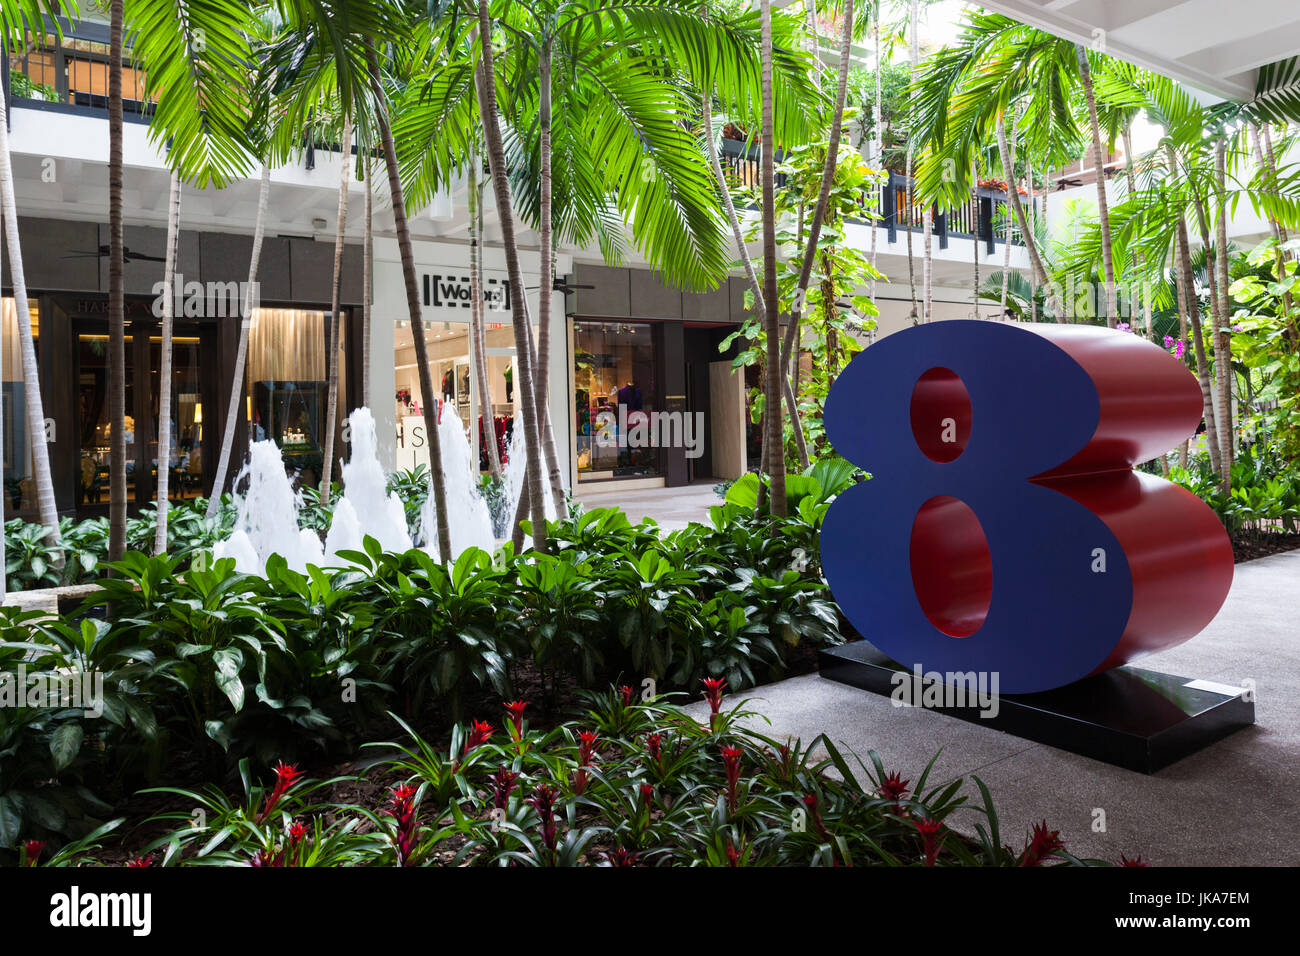 A Look Inside Burberry's Miami Store at Bal Harbour Shops [PHOTOS] – WWD